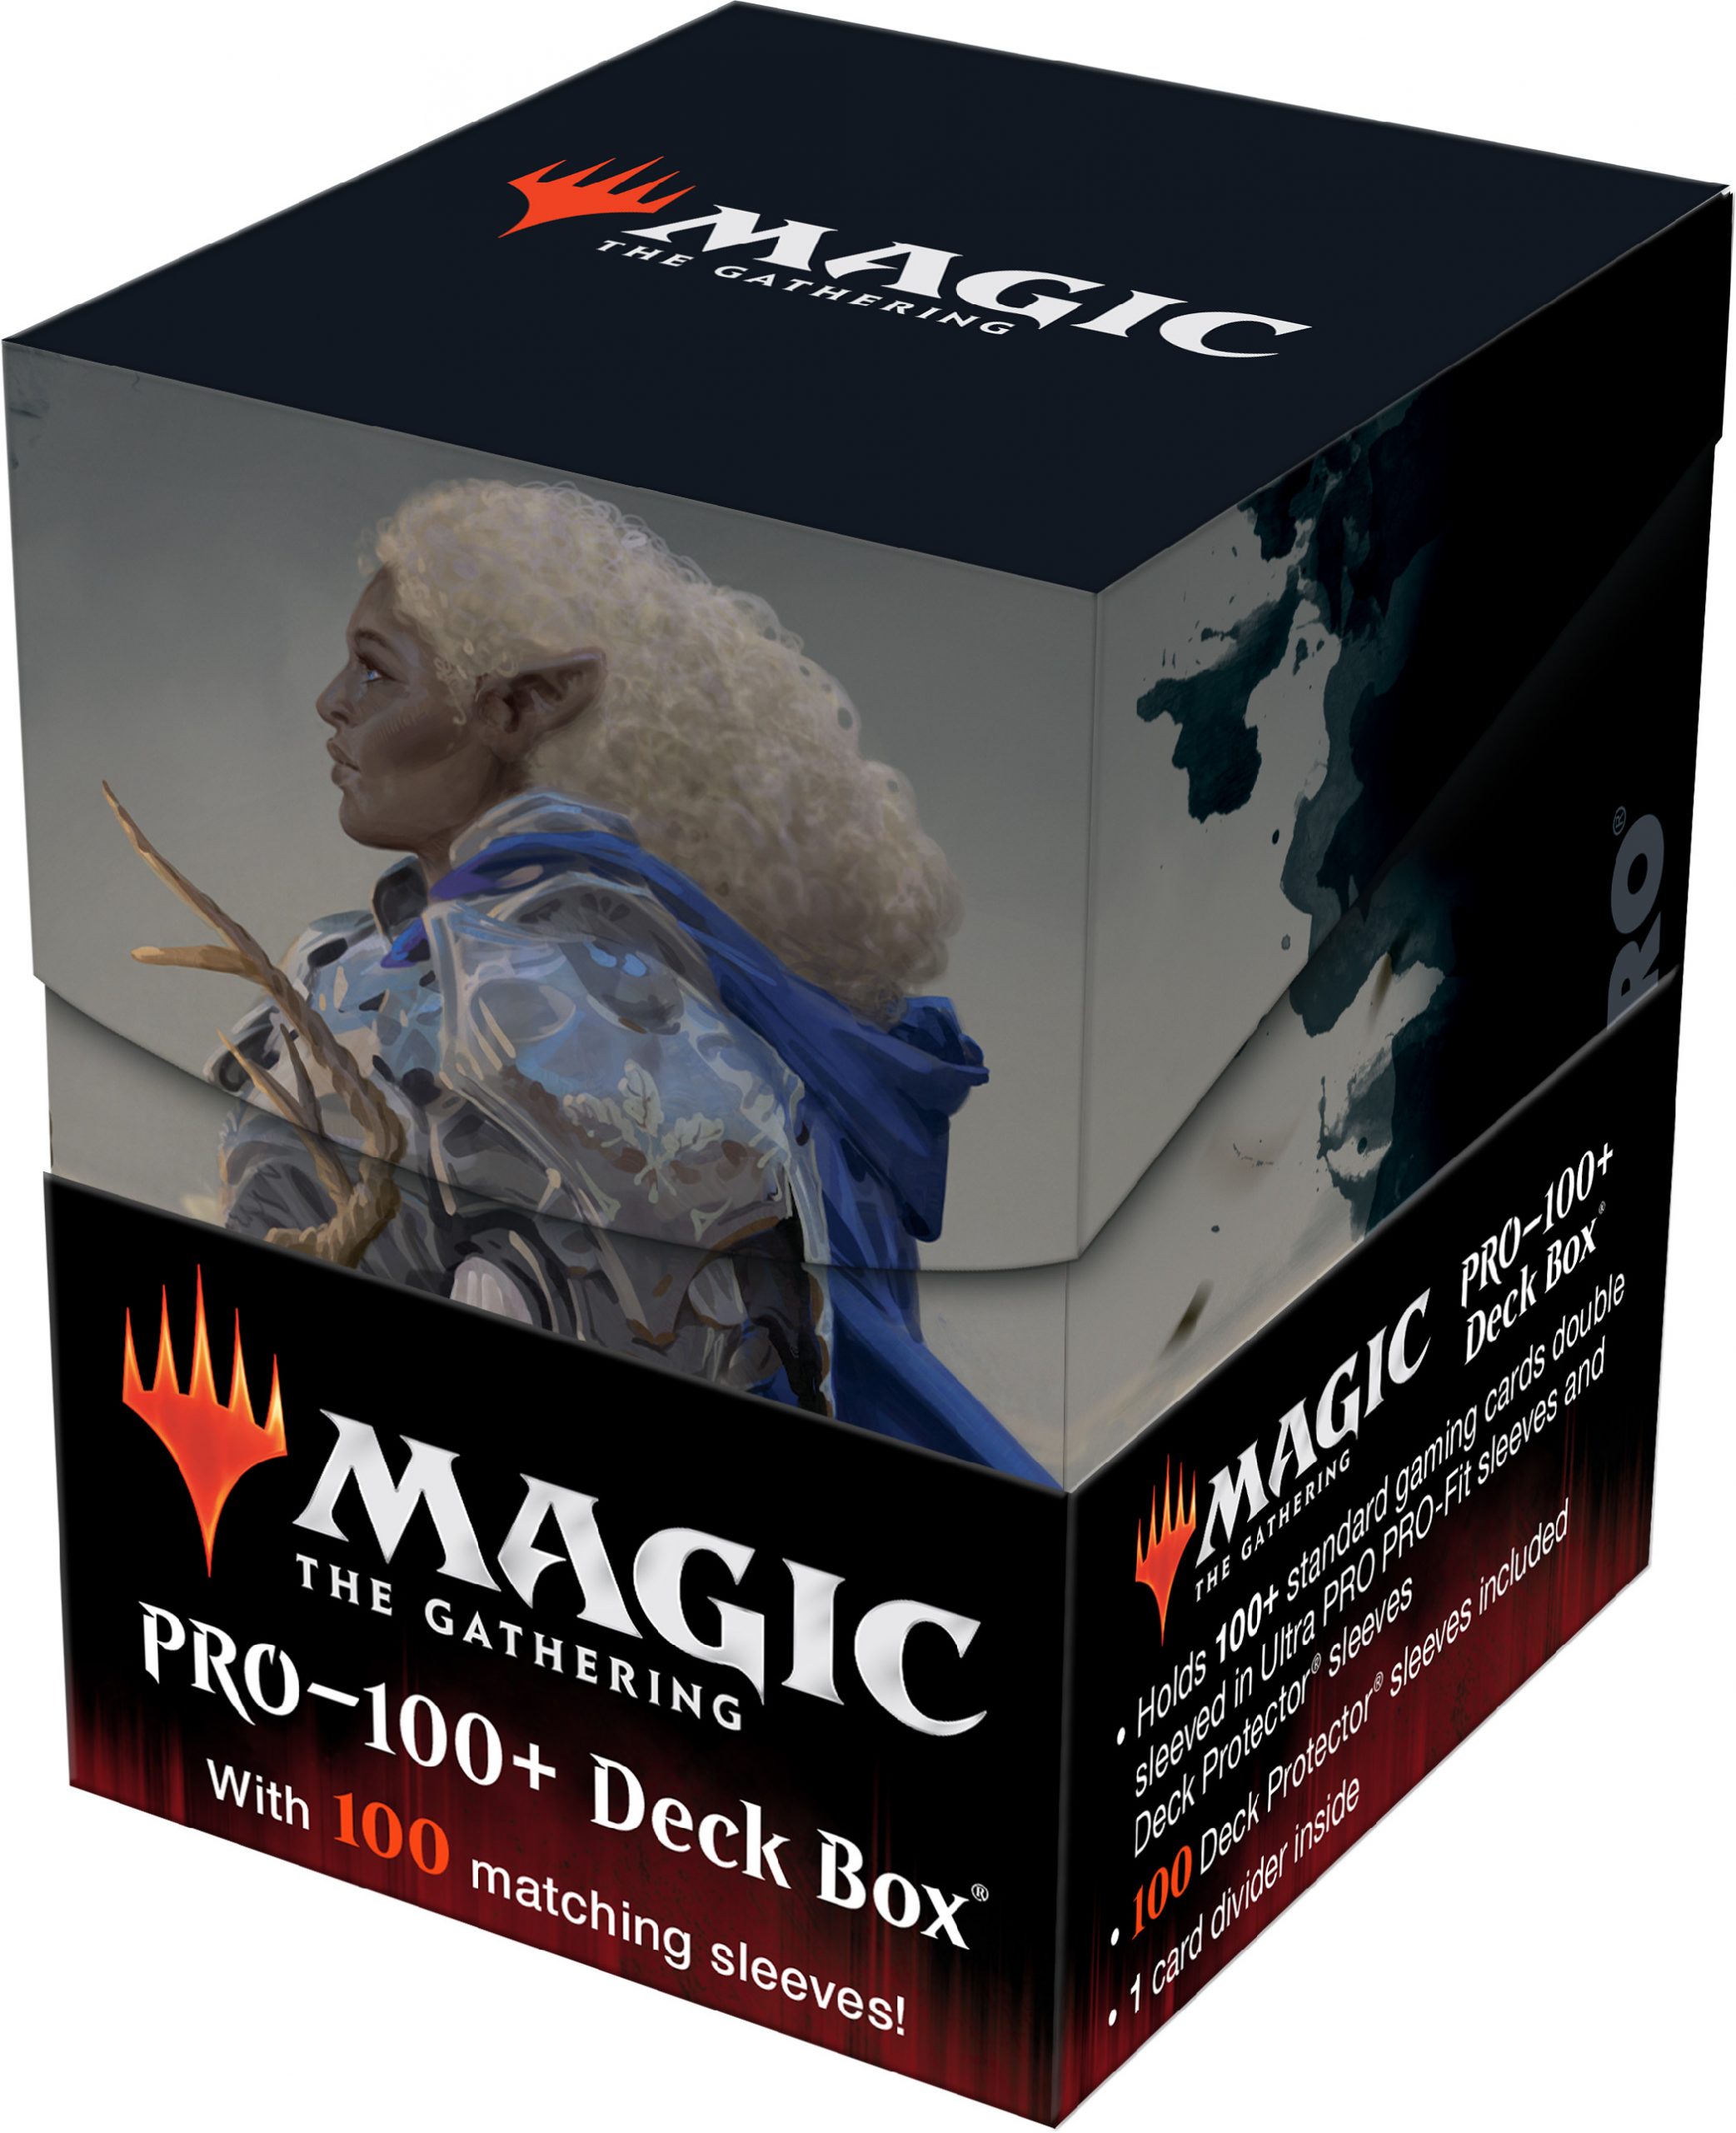 Ultra Pro UltraPro Deck Box 100+ Commander Adventures in the Forgotten Realms + 100ct sleeves V4 for Magic: The Gathering